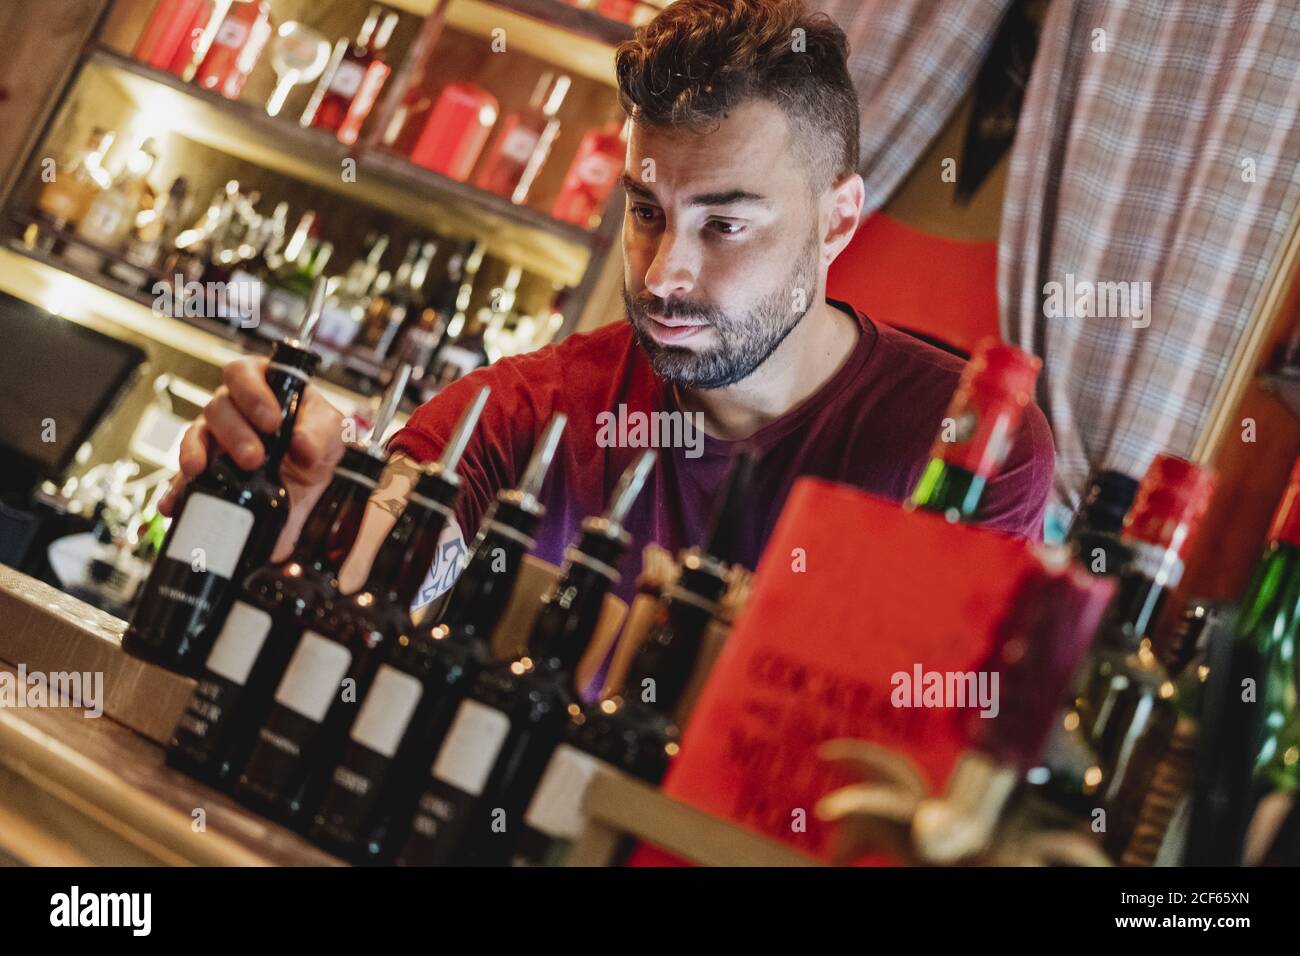 Barman in uniform and red gloves preparing cocktail and pouring drink to red bottle for mixing Stock Photo